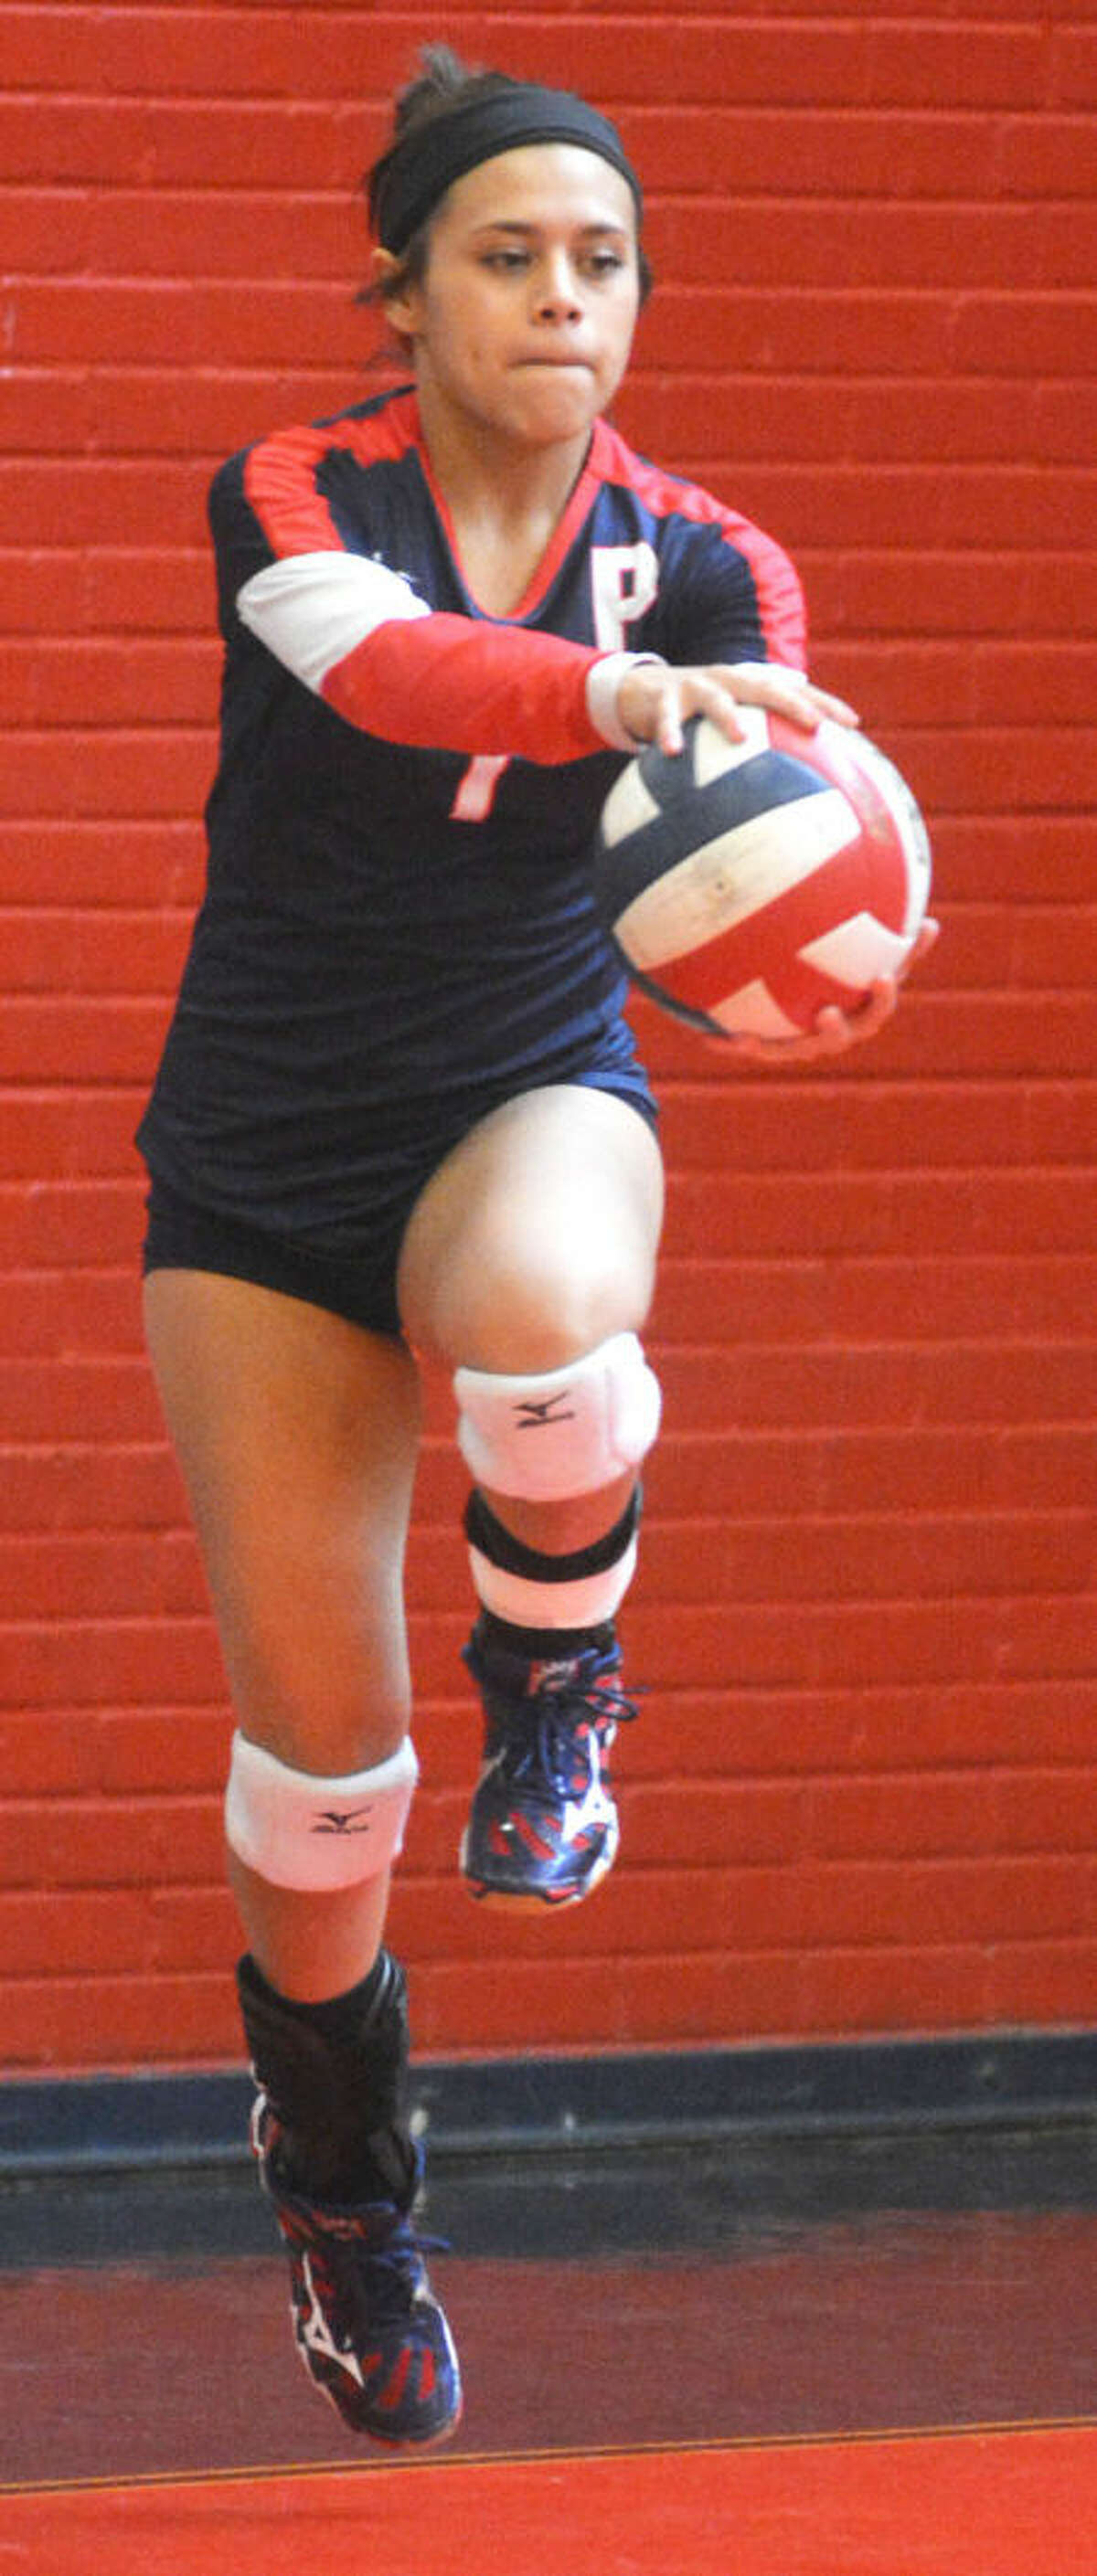 Plainview's Kim Balderas begins her approach on a serve during the Lady Bulldogs' victory over Caprock Saturday.